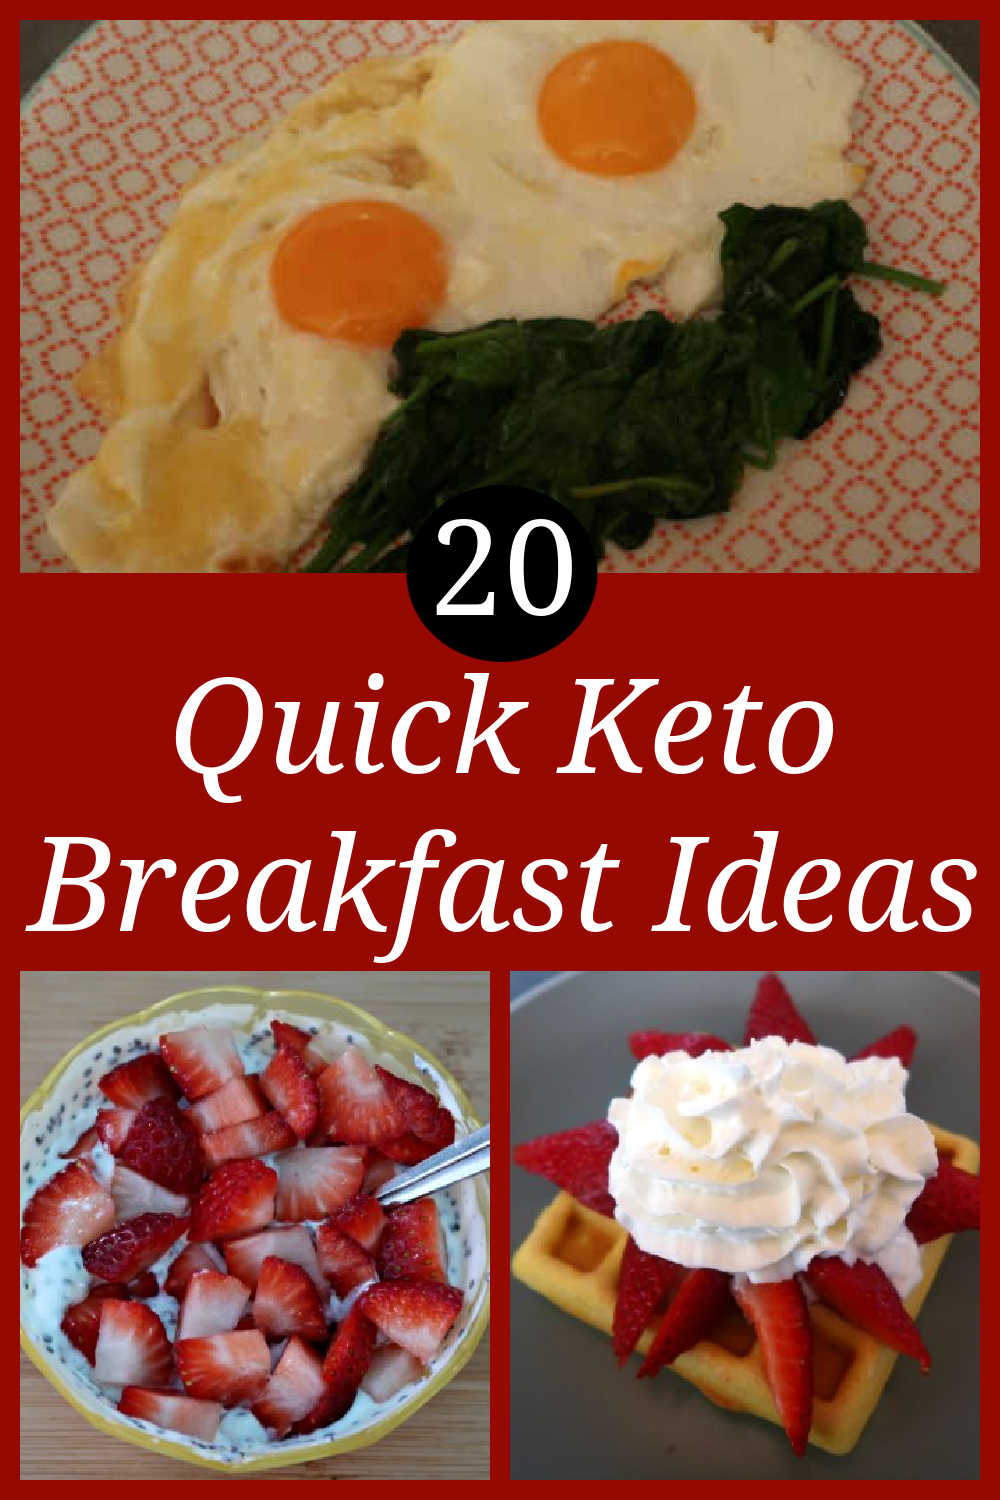 20 Quick Keto Breakfast Ideas - The best easy and delicious low carb breakfast recipes to meal prep at the last minute - with video. 